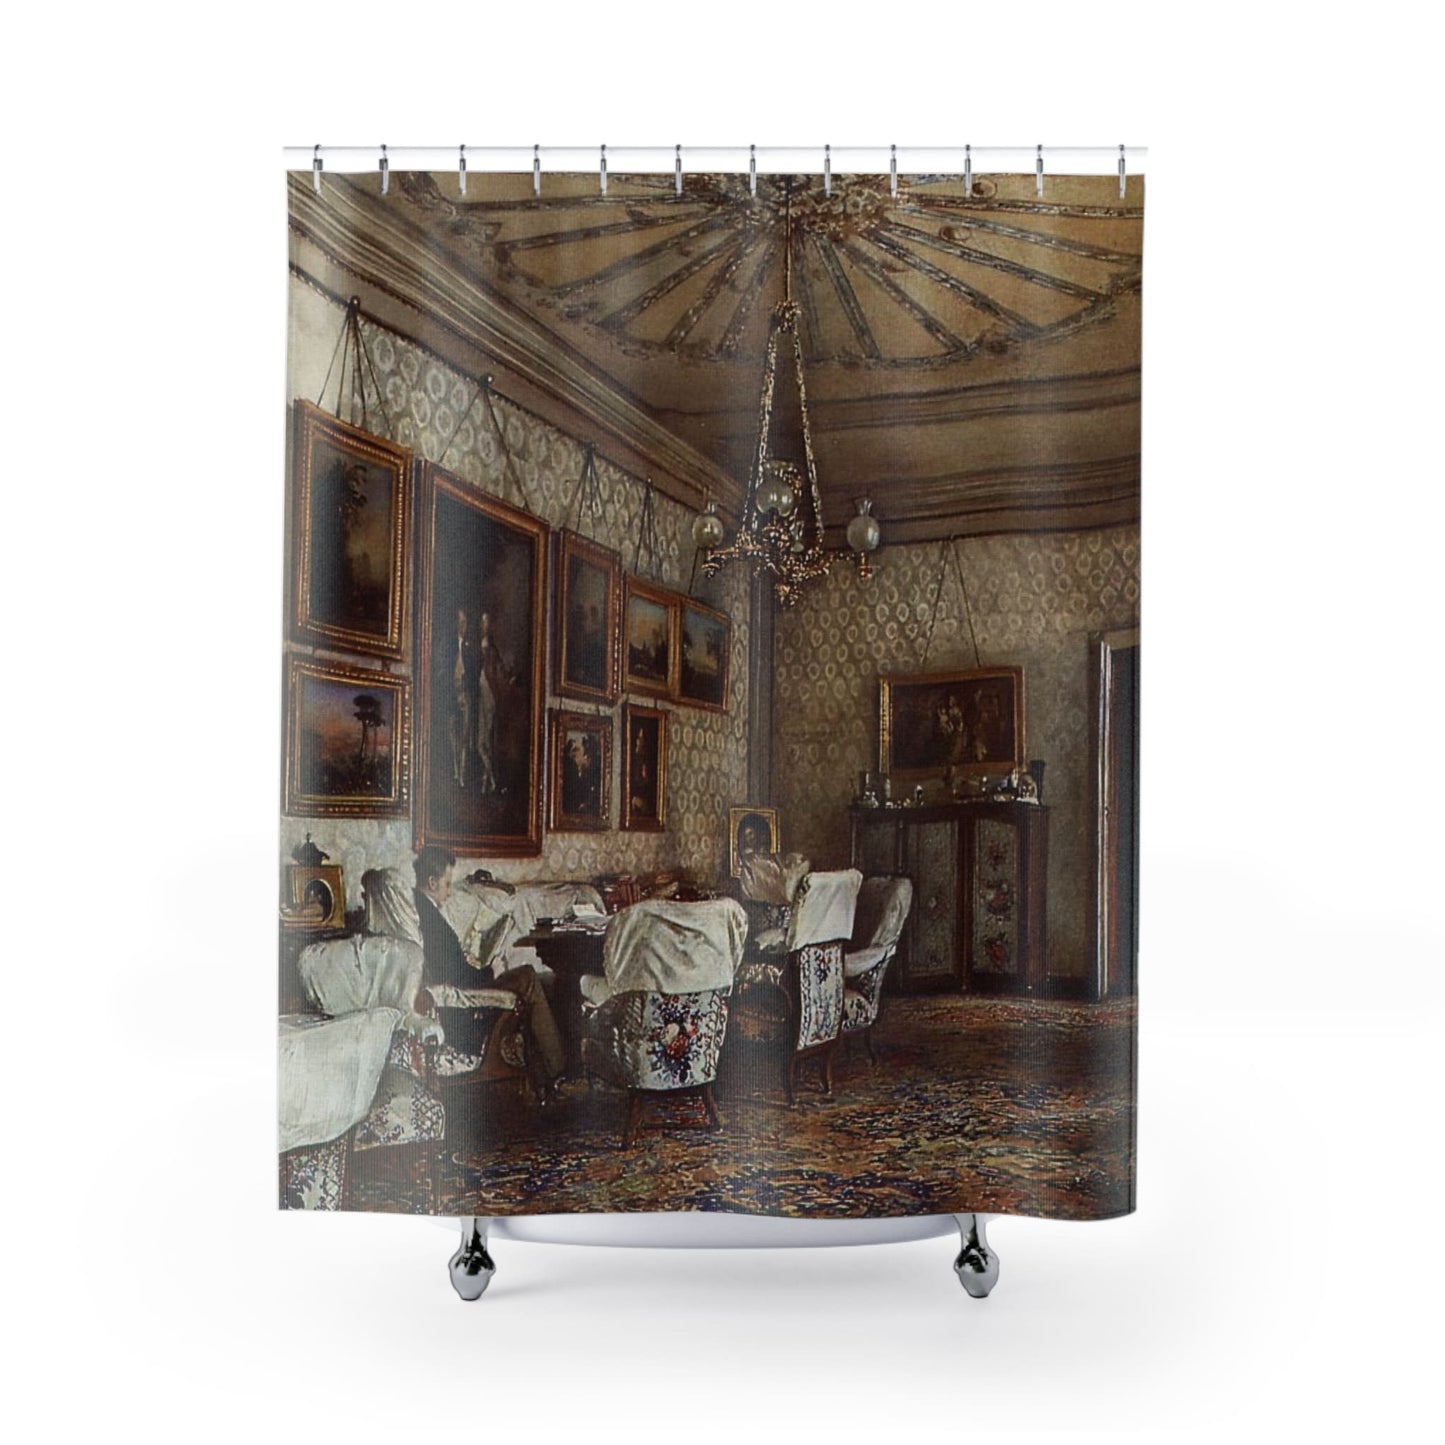 Antique Painting Shower Curtain with Victorian room design, historical bathroom decor featuring classic Victorian art.